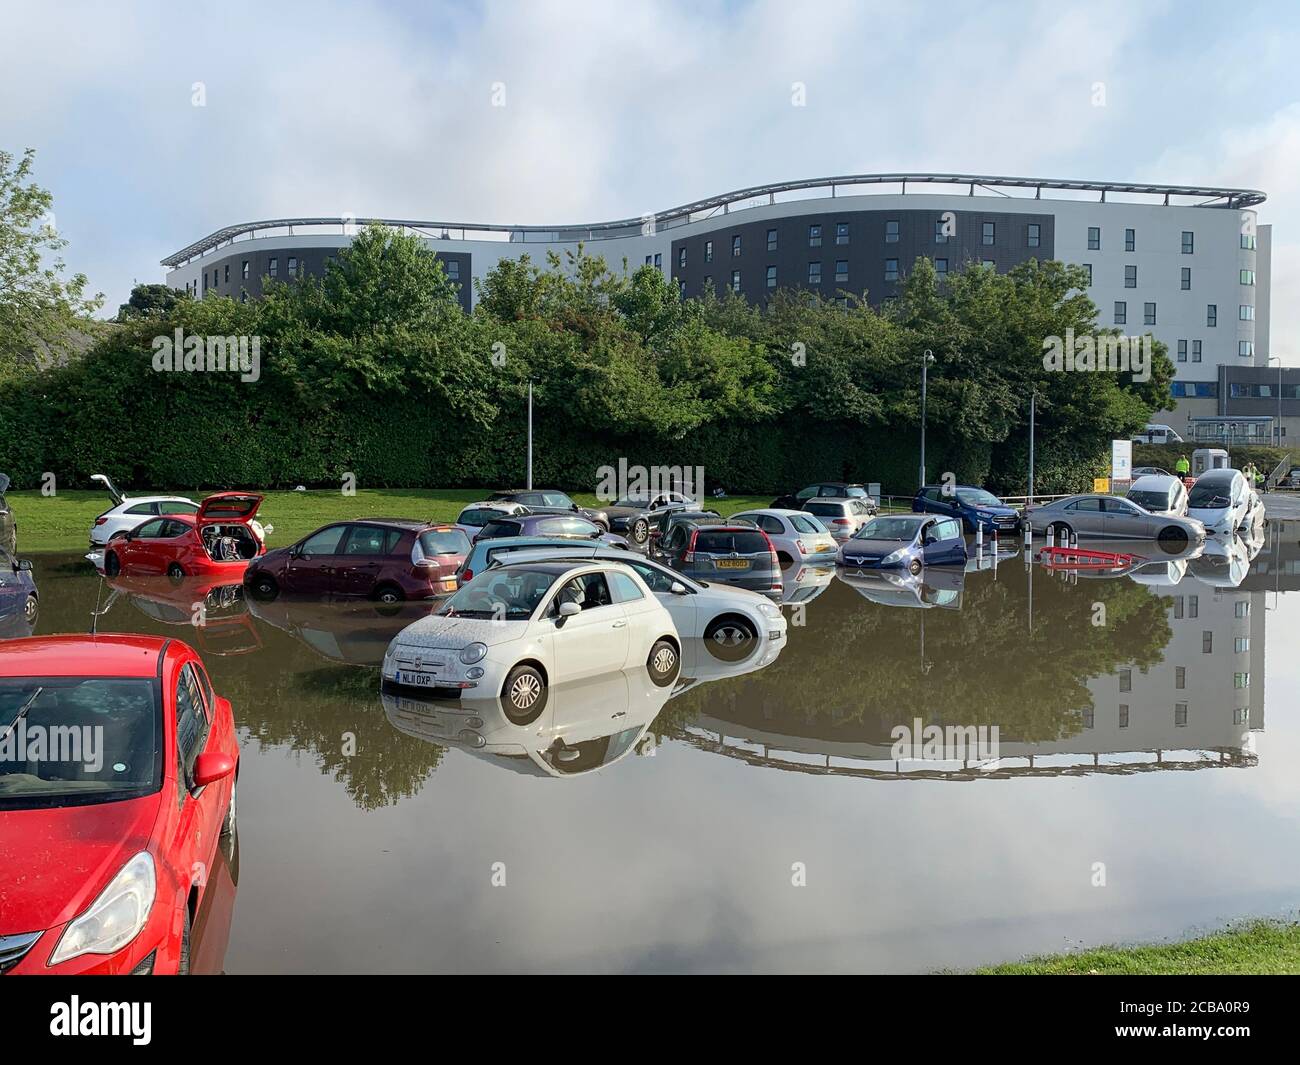 Flooding at Queen Victoria Hospital car park, in Kirkcaldy, Fife, Scotland. Thunderstorm warnings are still current for most of the UK on Wednesday, while high temperatures are forecast again for many parts of England. Stock Photo